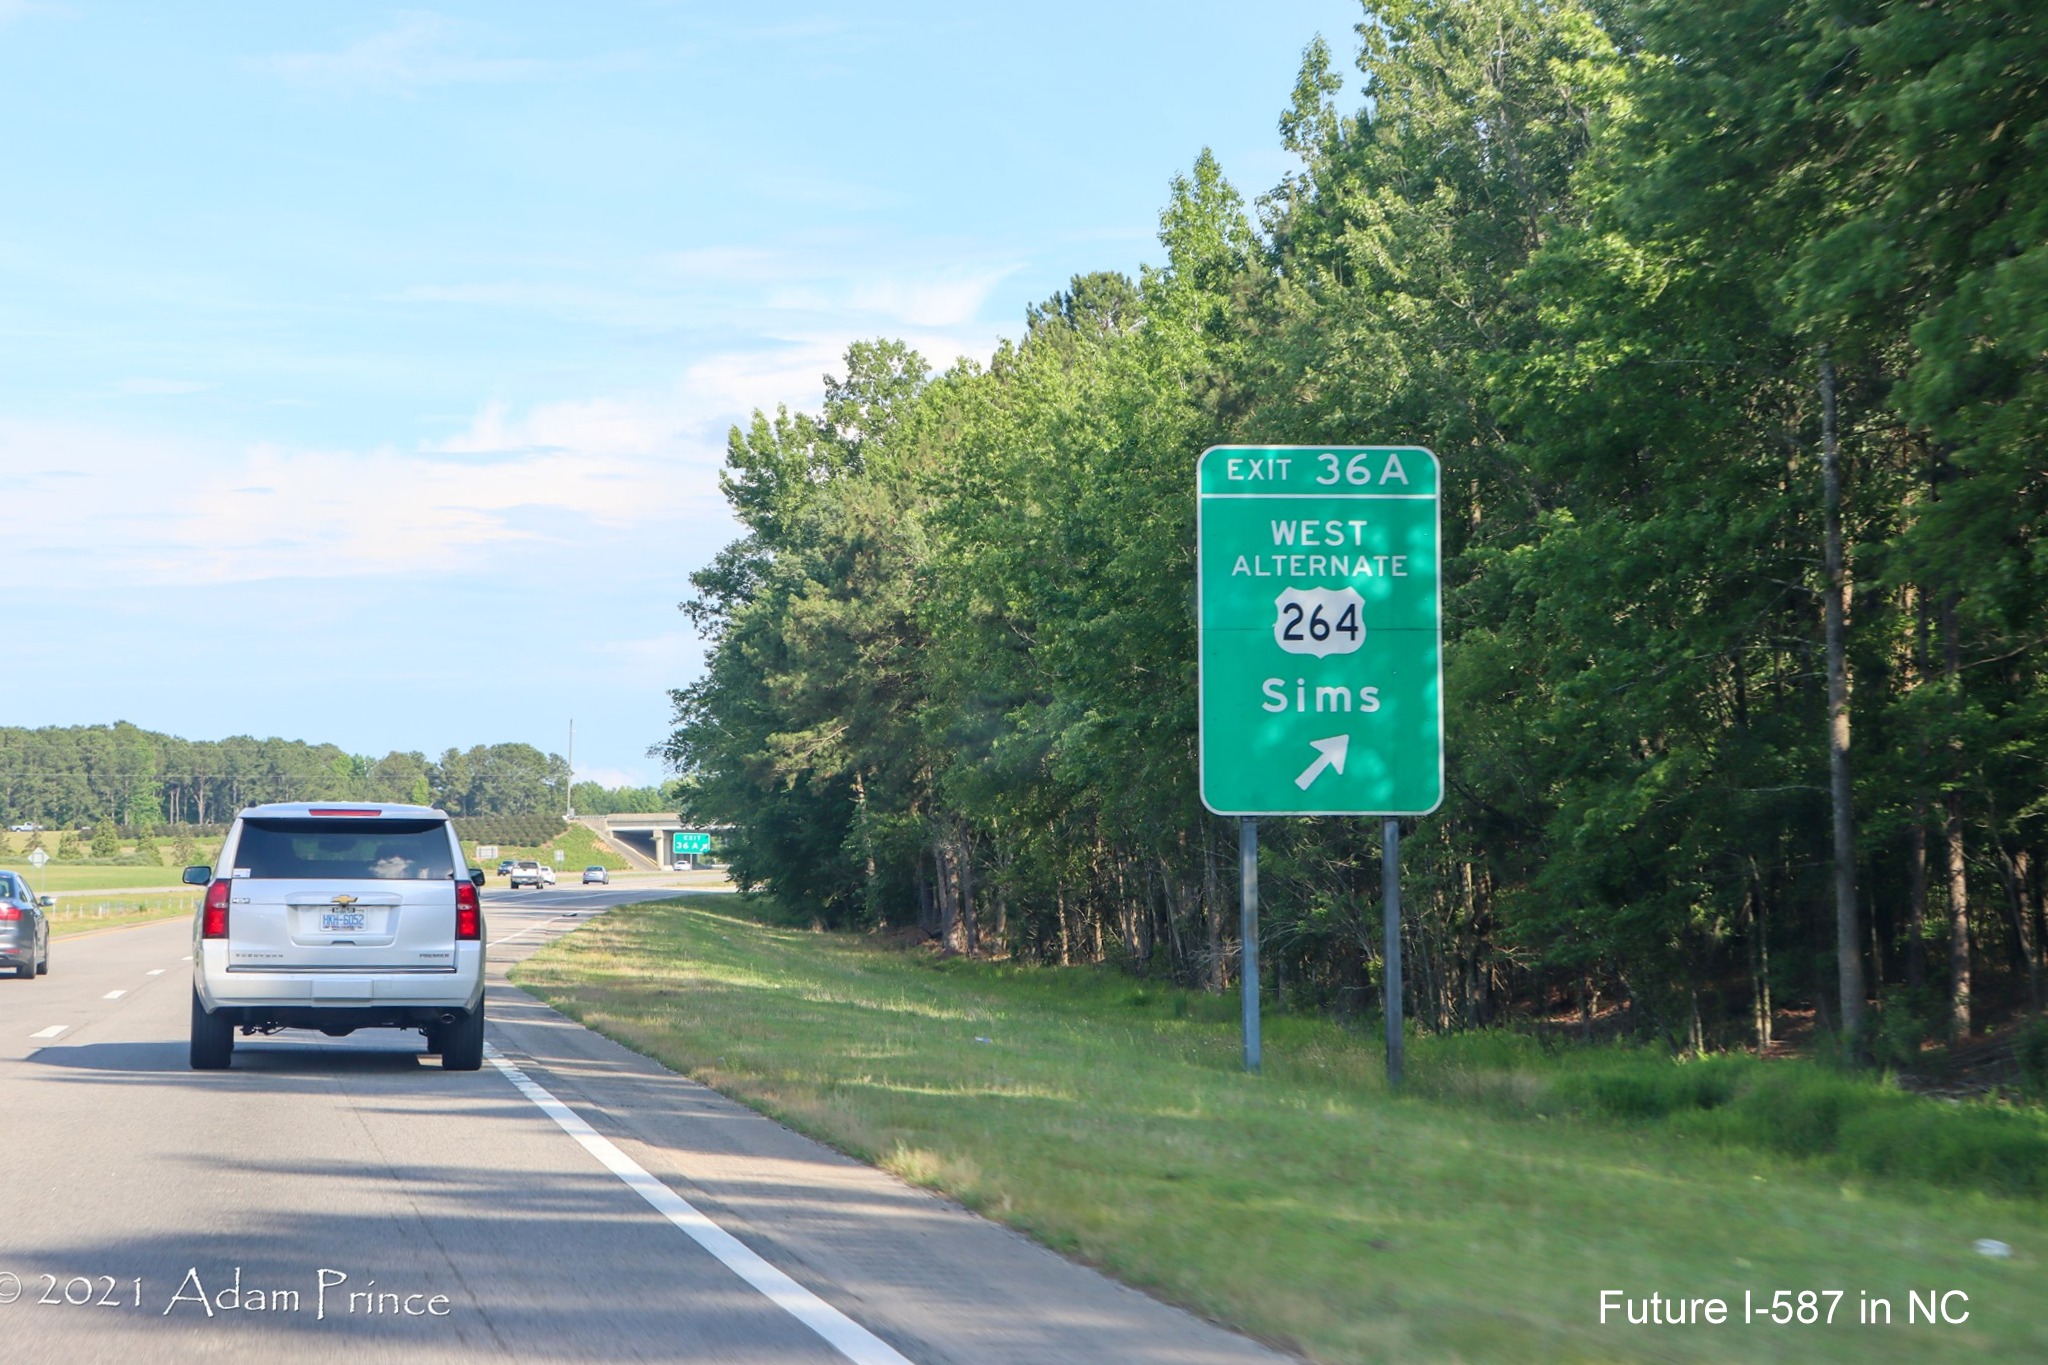 Ground mounted ramp sign for West US 264 Alternate exit on US 264 East (Future I-587 South) in Sims, photo by Adam Prince, June 2021